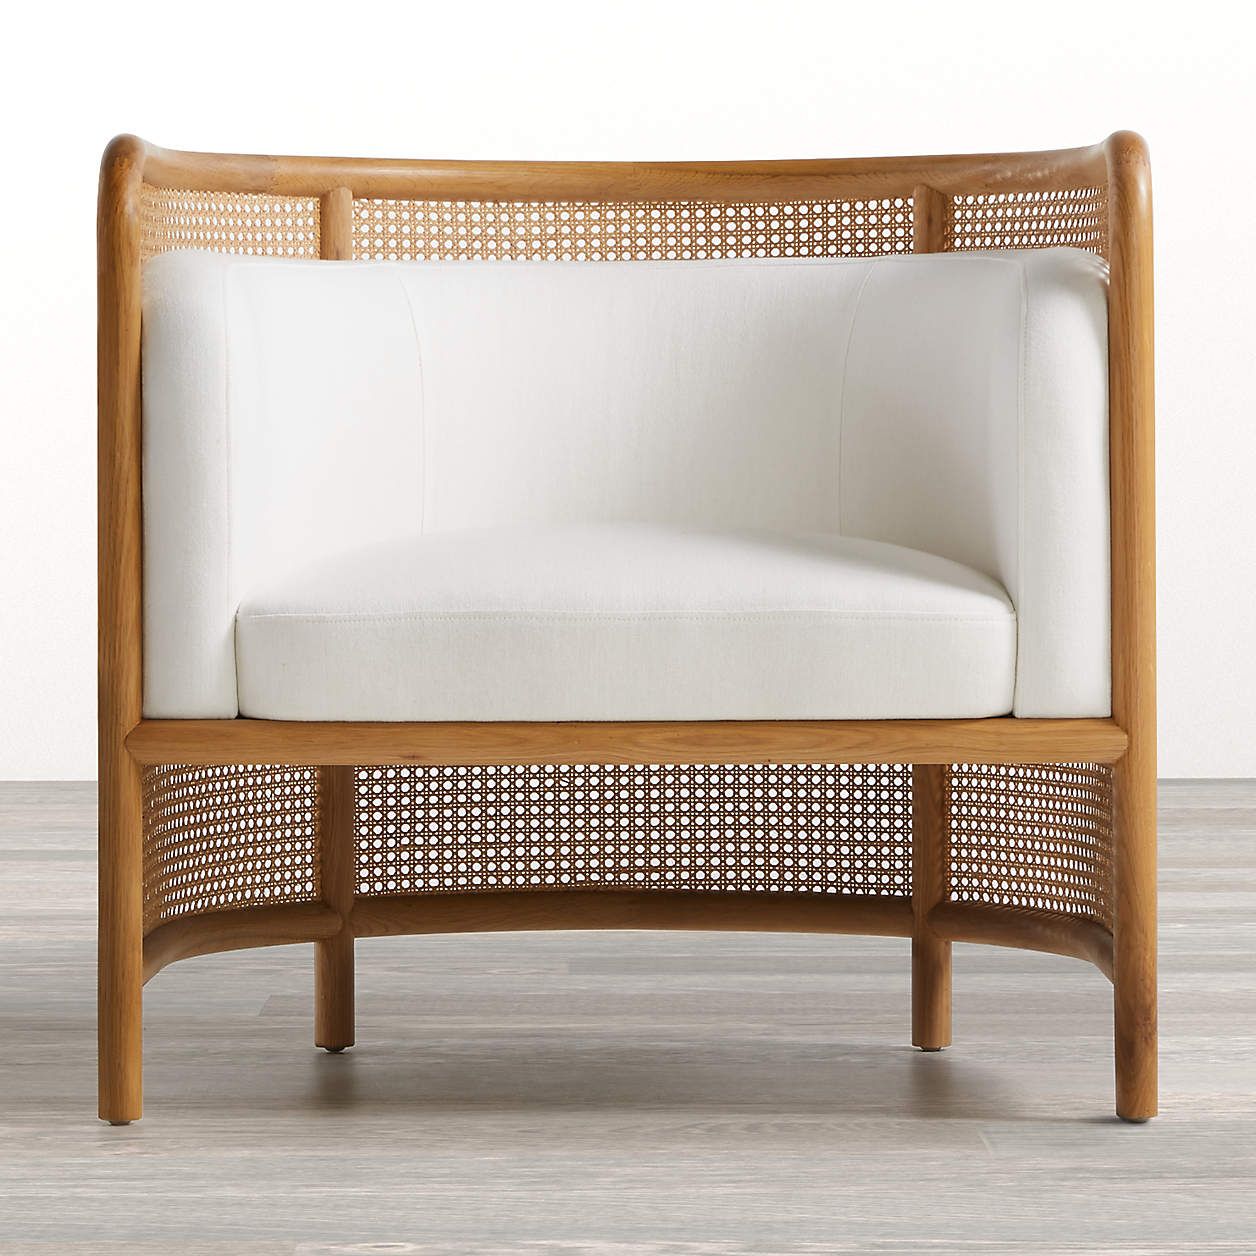 Fields Cane Dark Brown and White Chair + Reviews | Crate & Barrel | Crate & Barrel